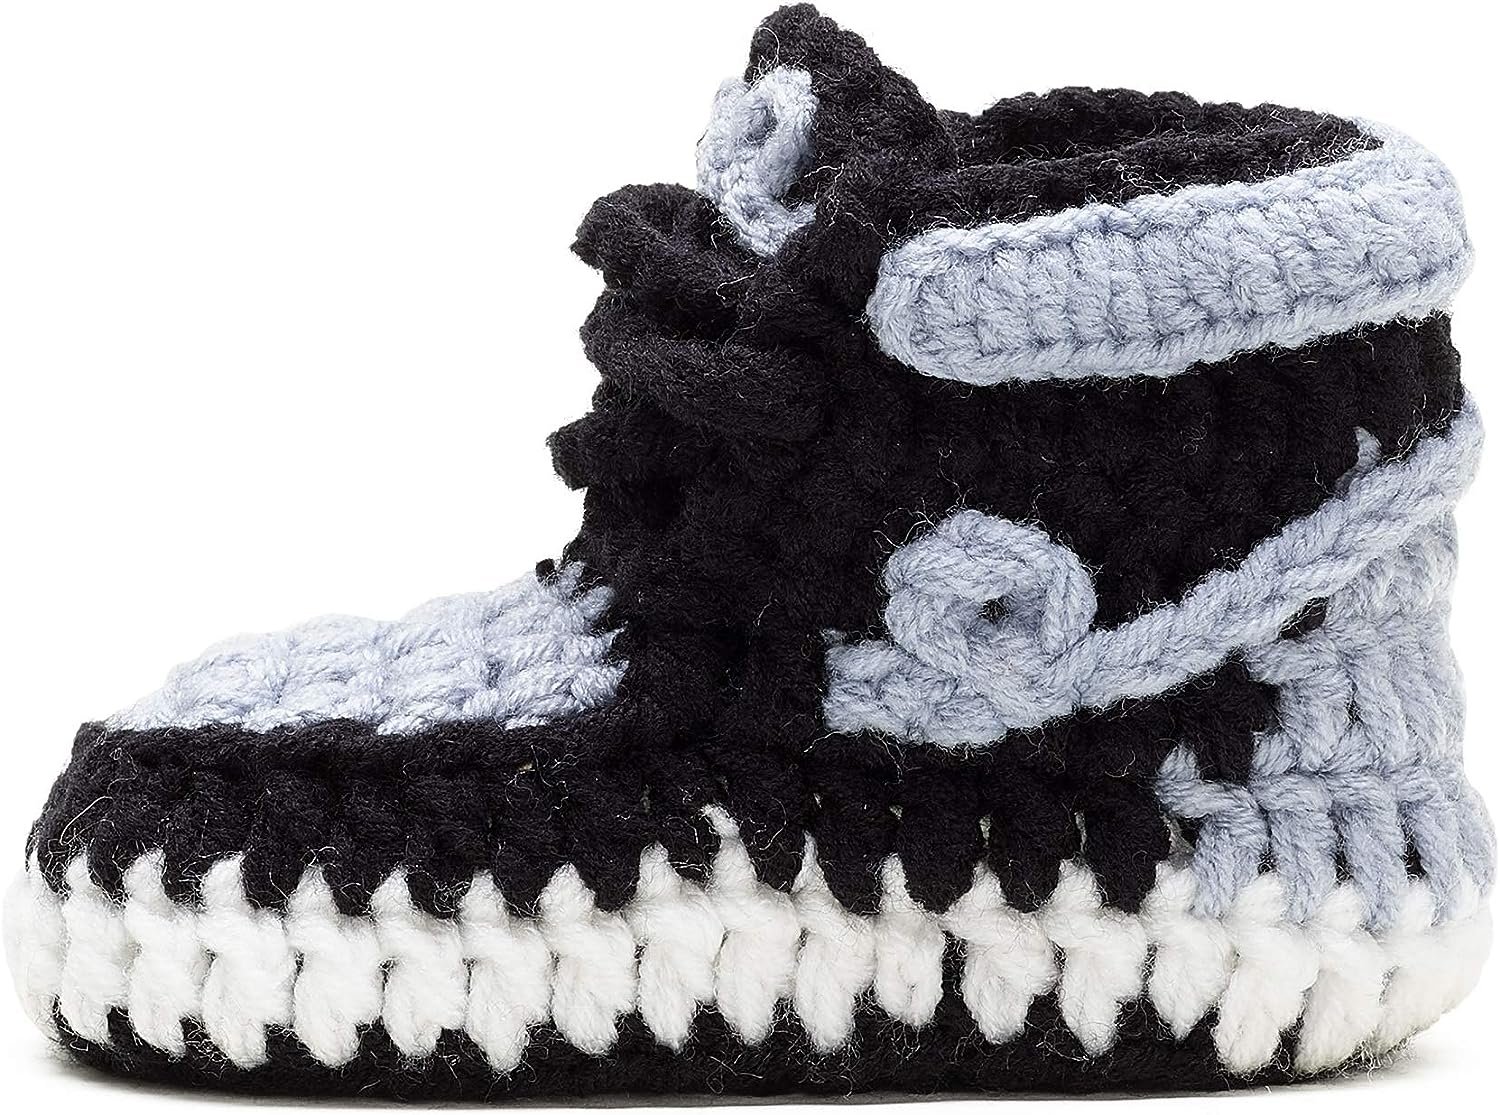 Itzzy Bitzzy Baby Sneakers - Crochet Shoes for Babies - Soft Booties for Boys and Girls - Soft Soled Slip On High Top Shoes